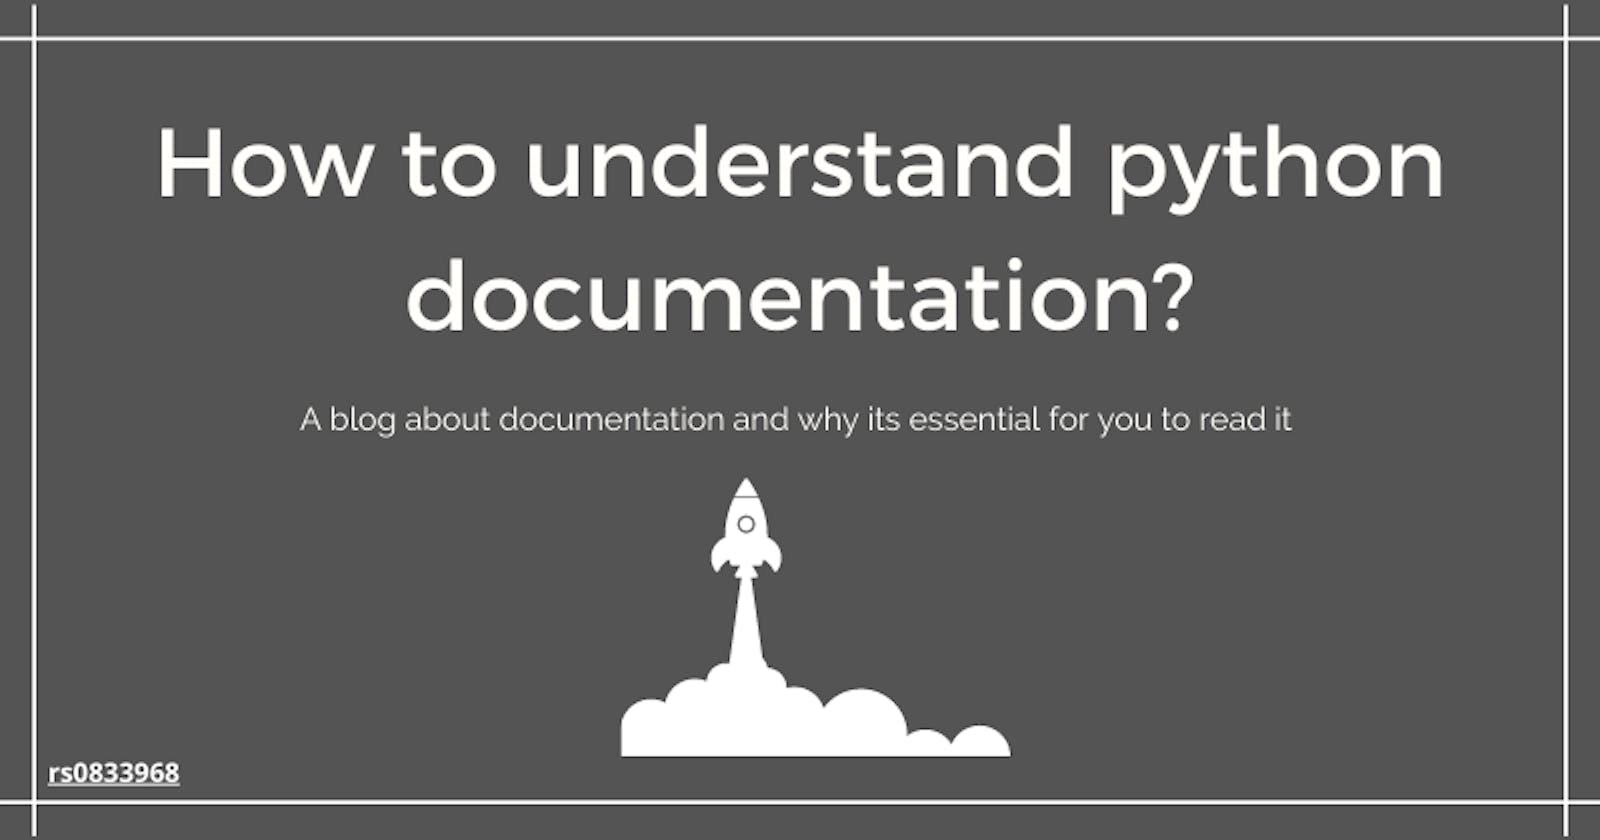 How to understand python documentation? A blog about documentation and why its essential for you to read it.